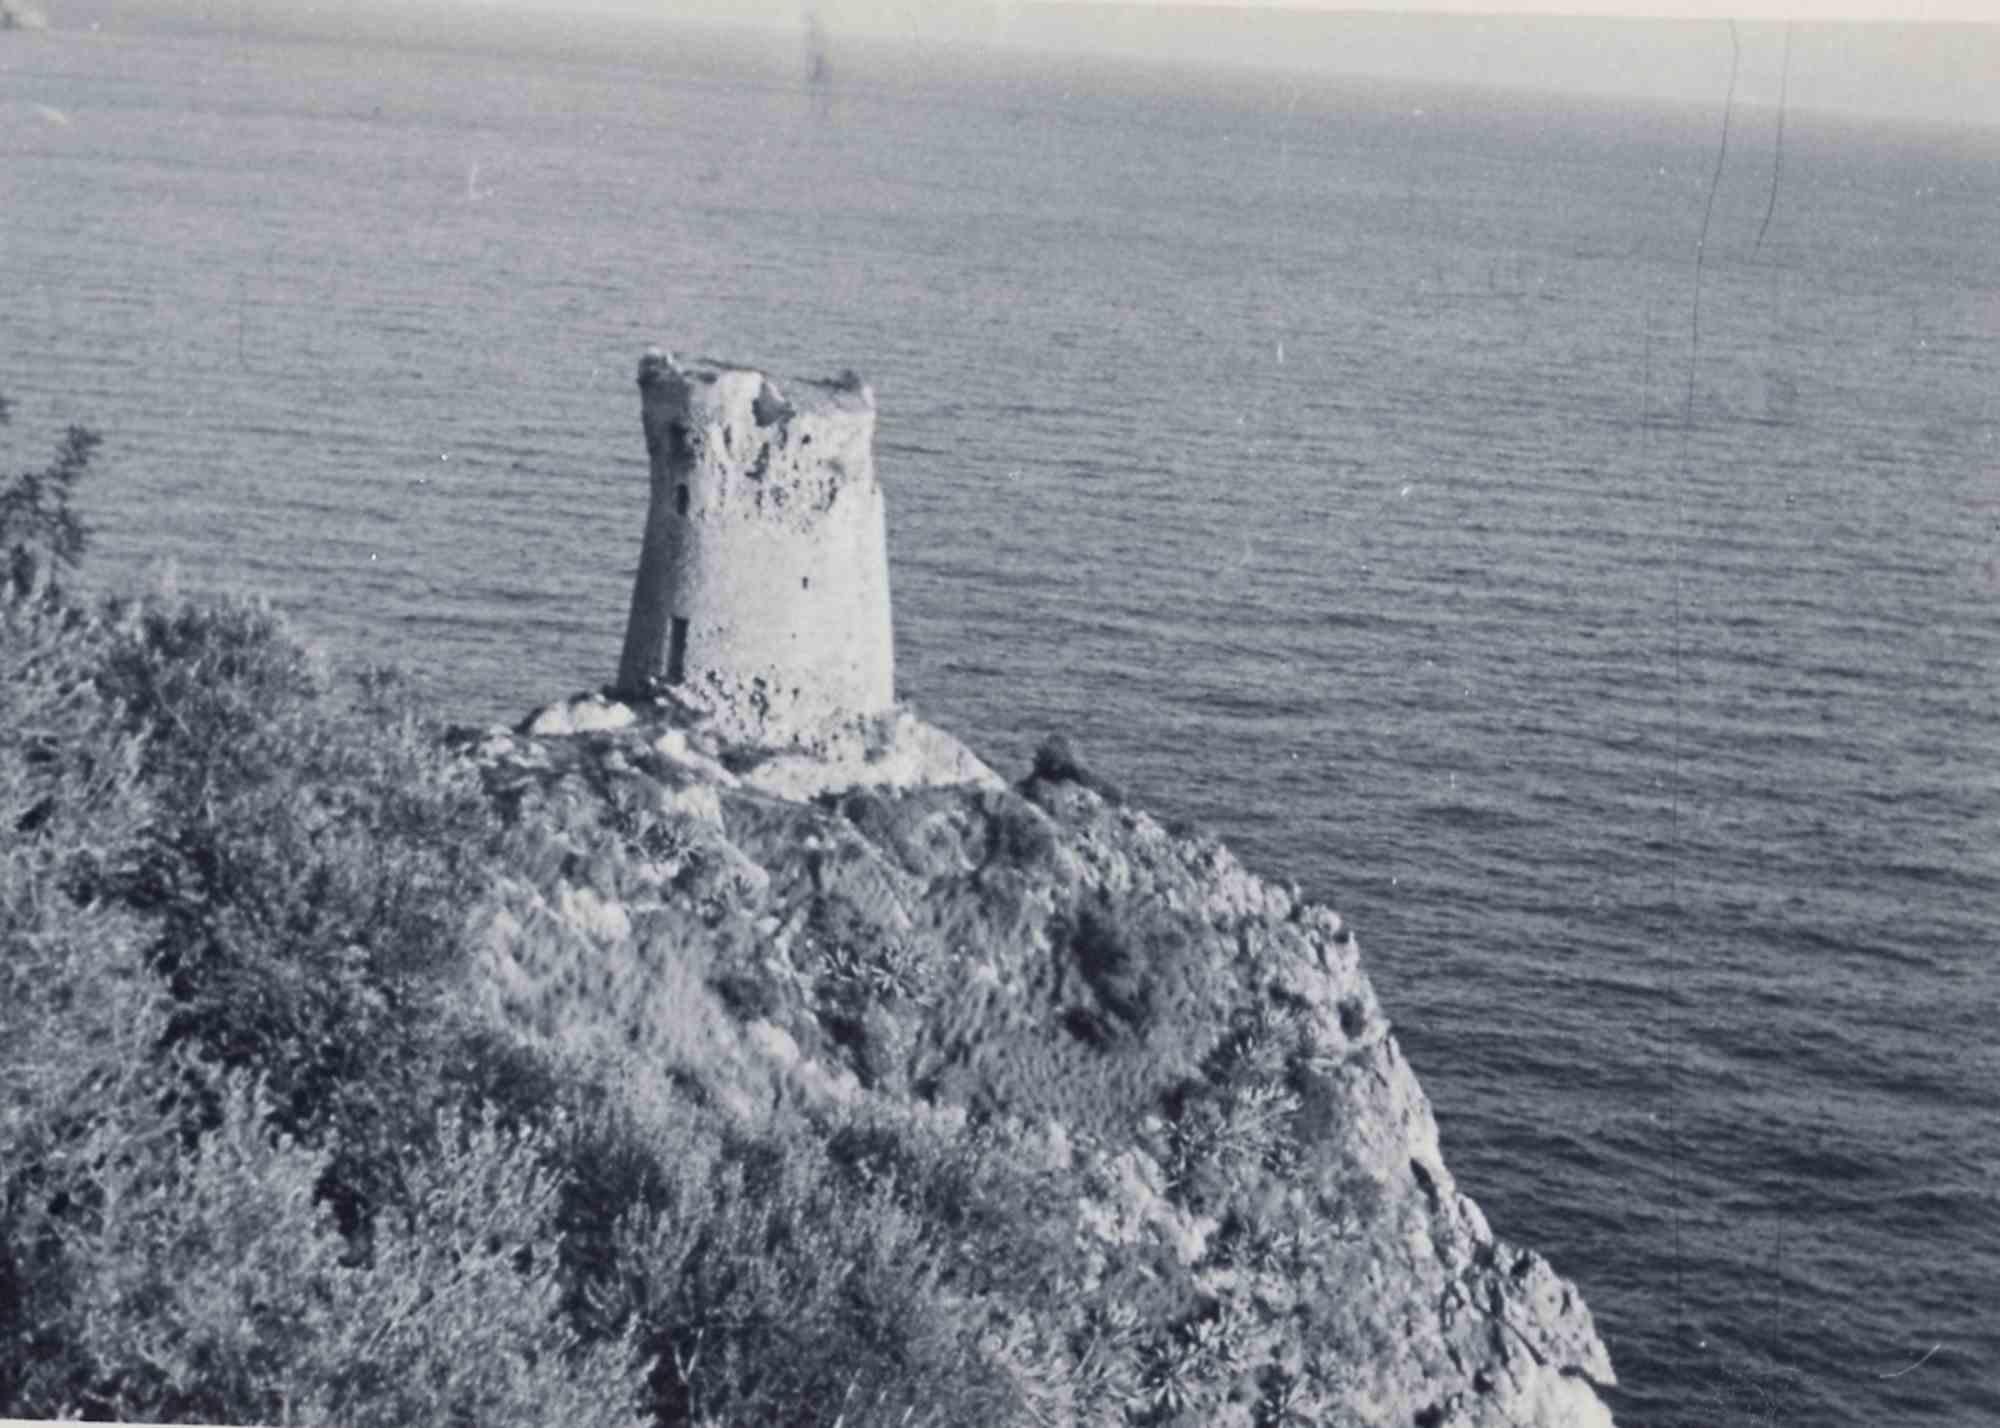 Unknown Landscape Photograph - Old days Photo - Old Tower - Vintage Photo - Early 20th Century